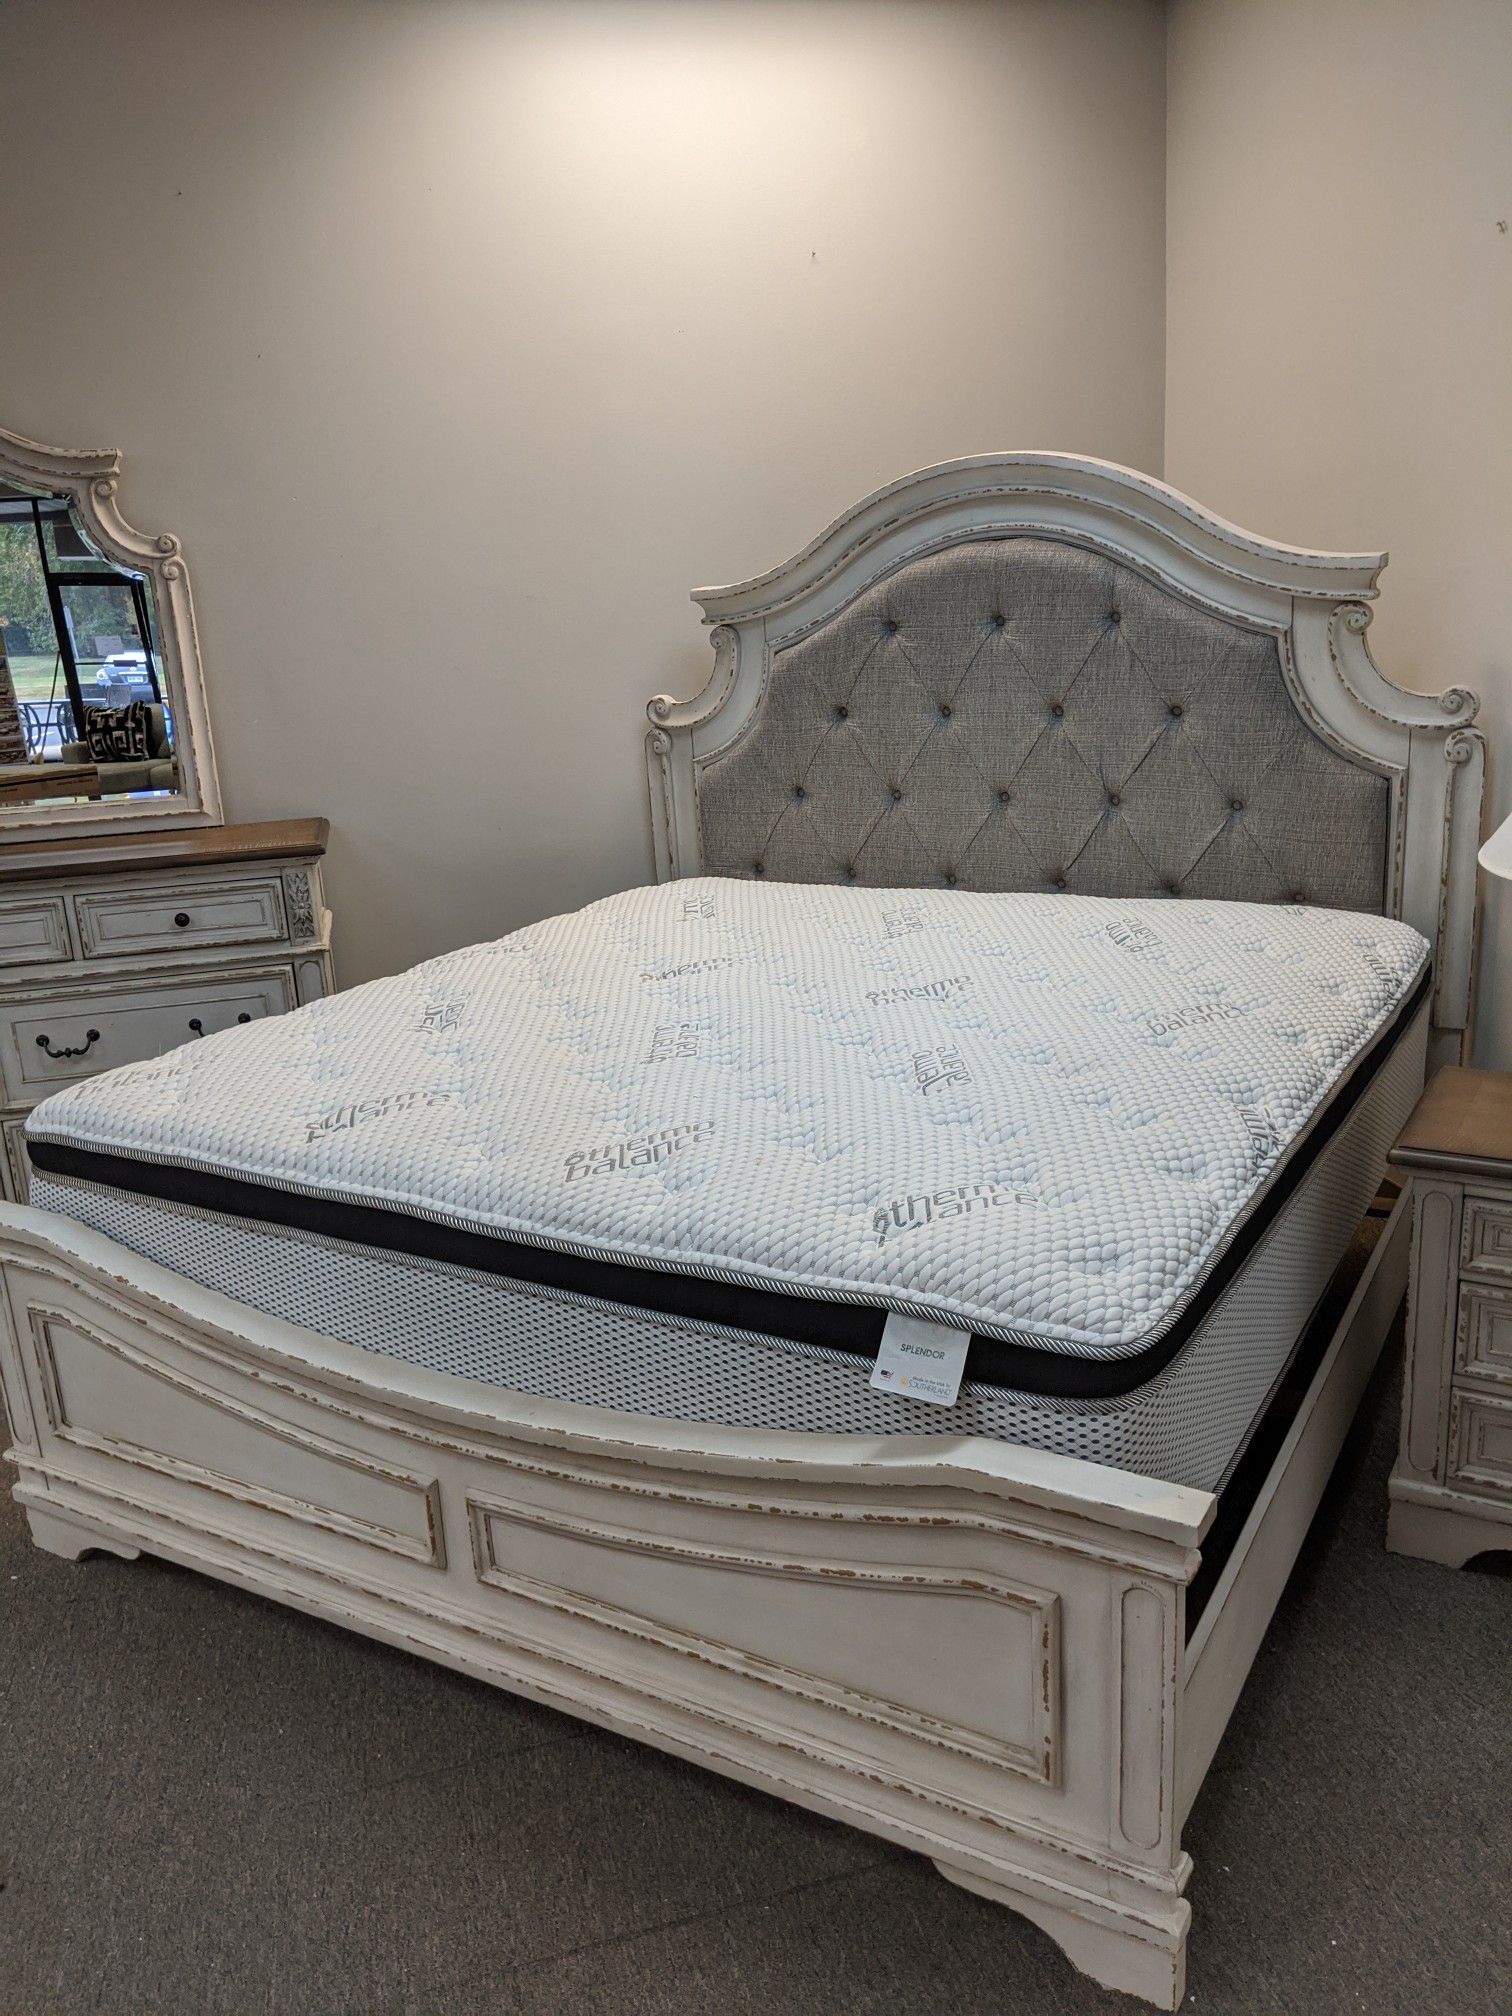 King Size Bed Frame - $599 - $40 down take home today!!! 12 MONTHS SAME AS CASH FINANCING AVAILABLE!!